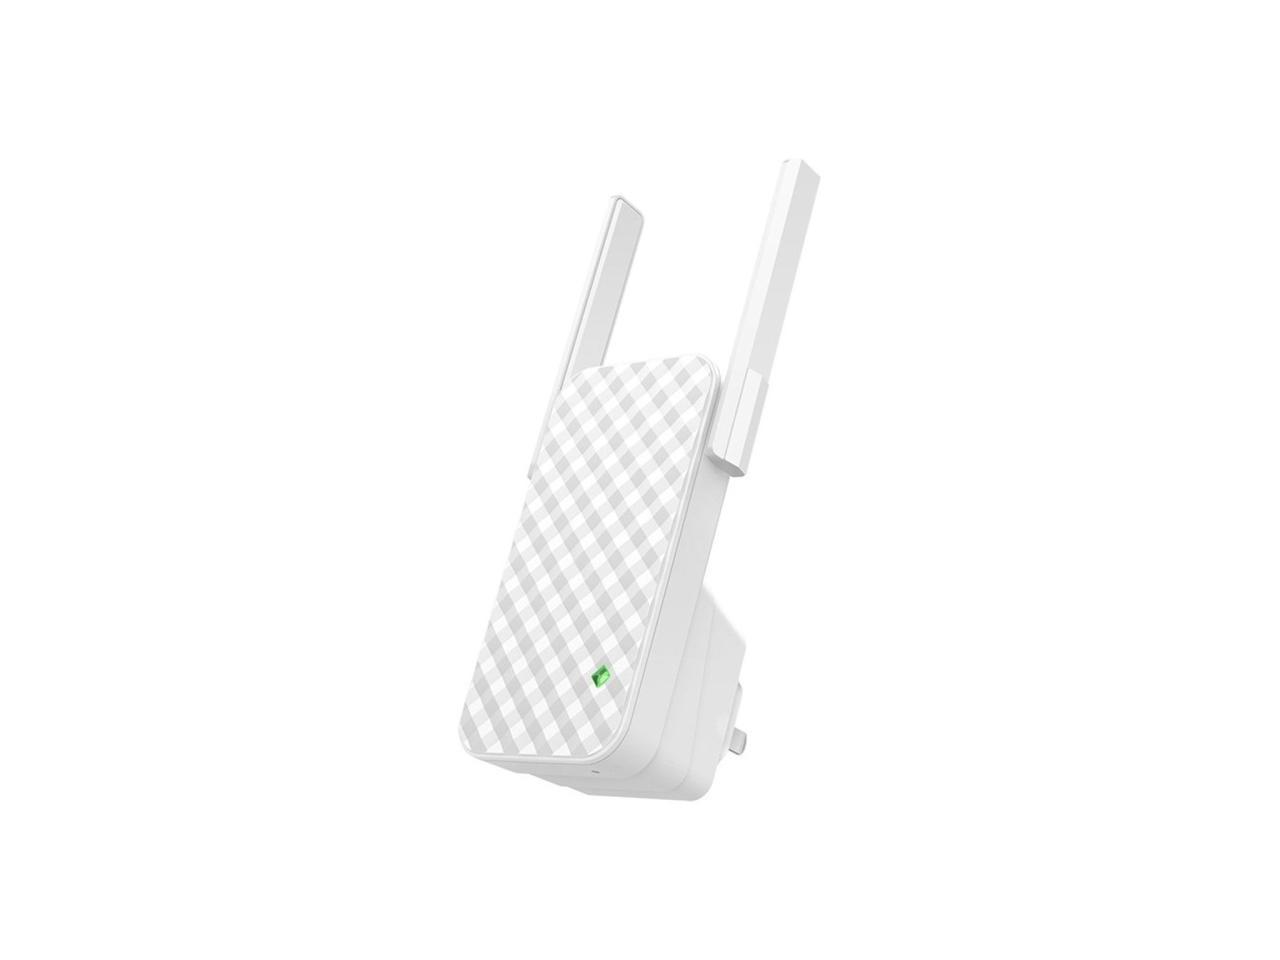 Tenda A301 300Mbps 802.11N WiFi Repeater Wireless Range Extender Booster US Plug 